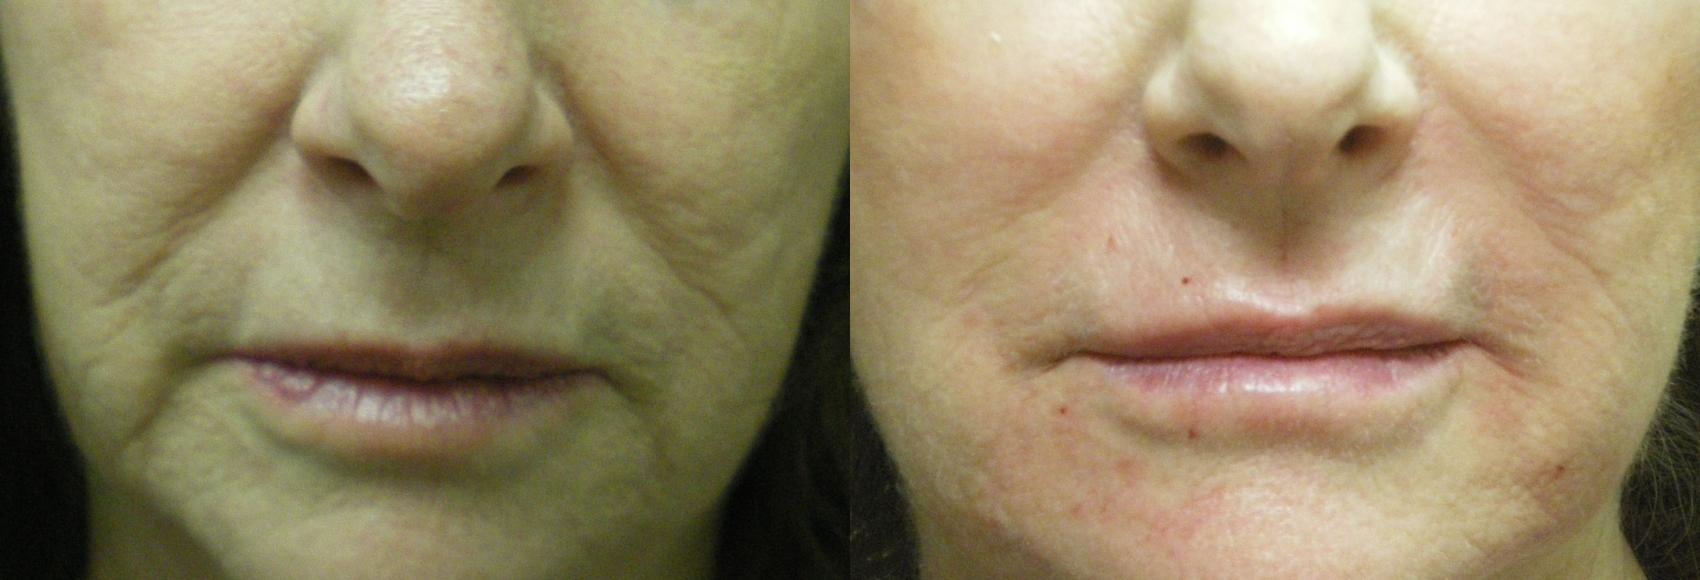 Dermal Fillers Before & After Photo | Marietta, GA | Plastic Surgery Center of the South